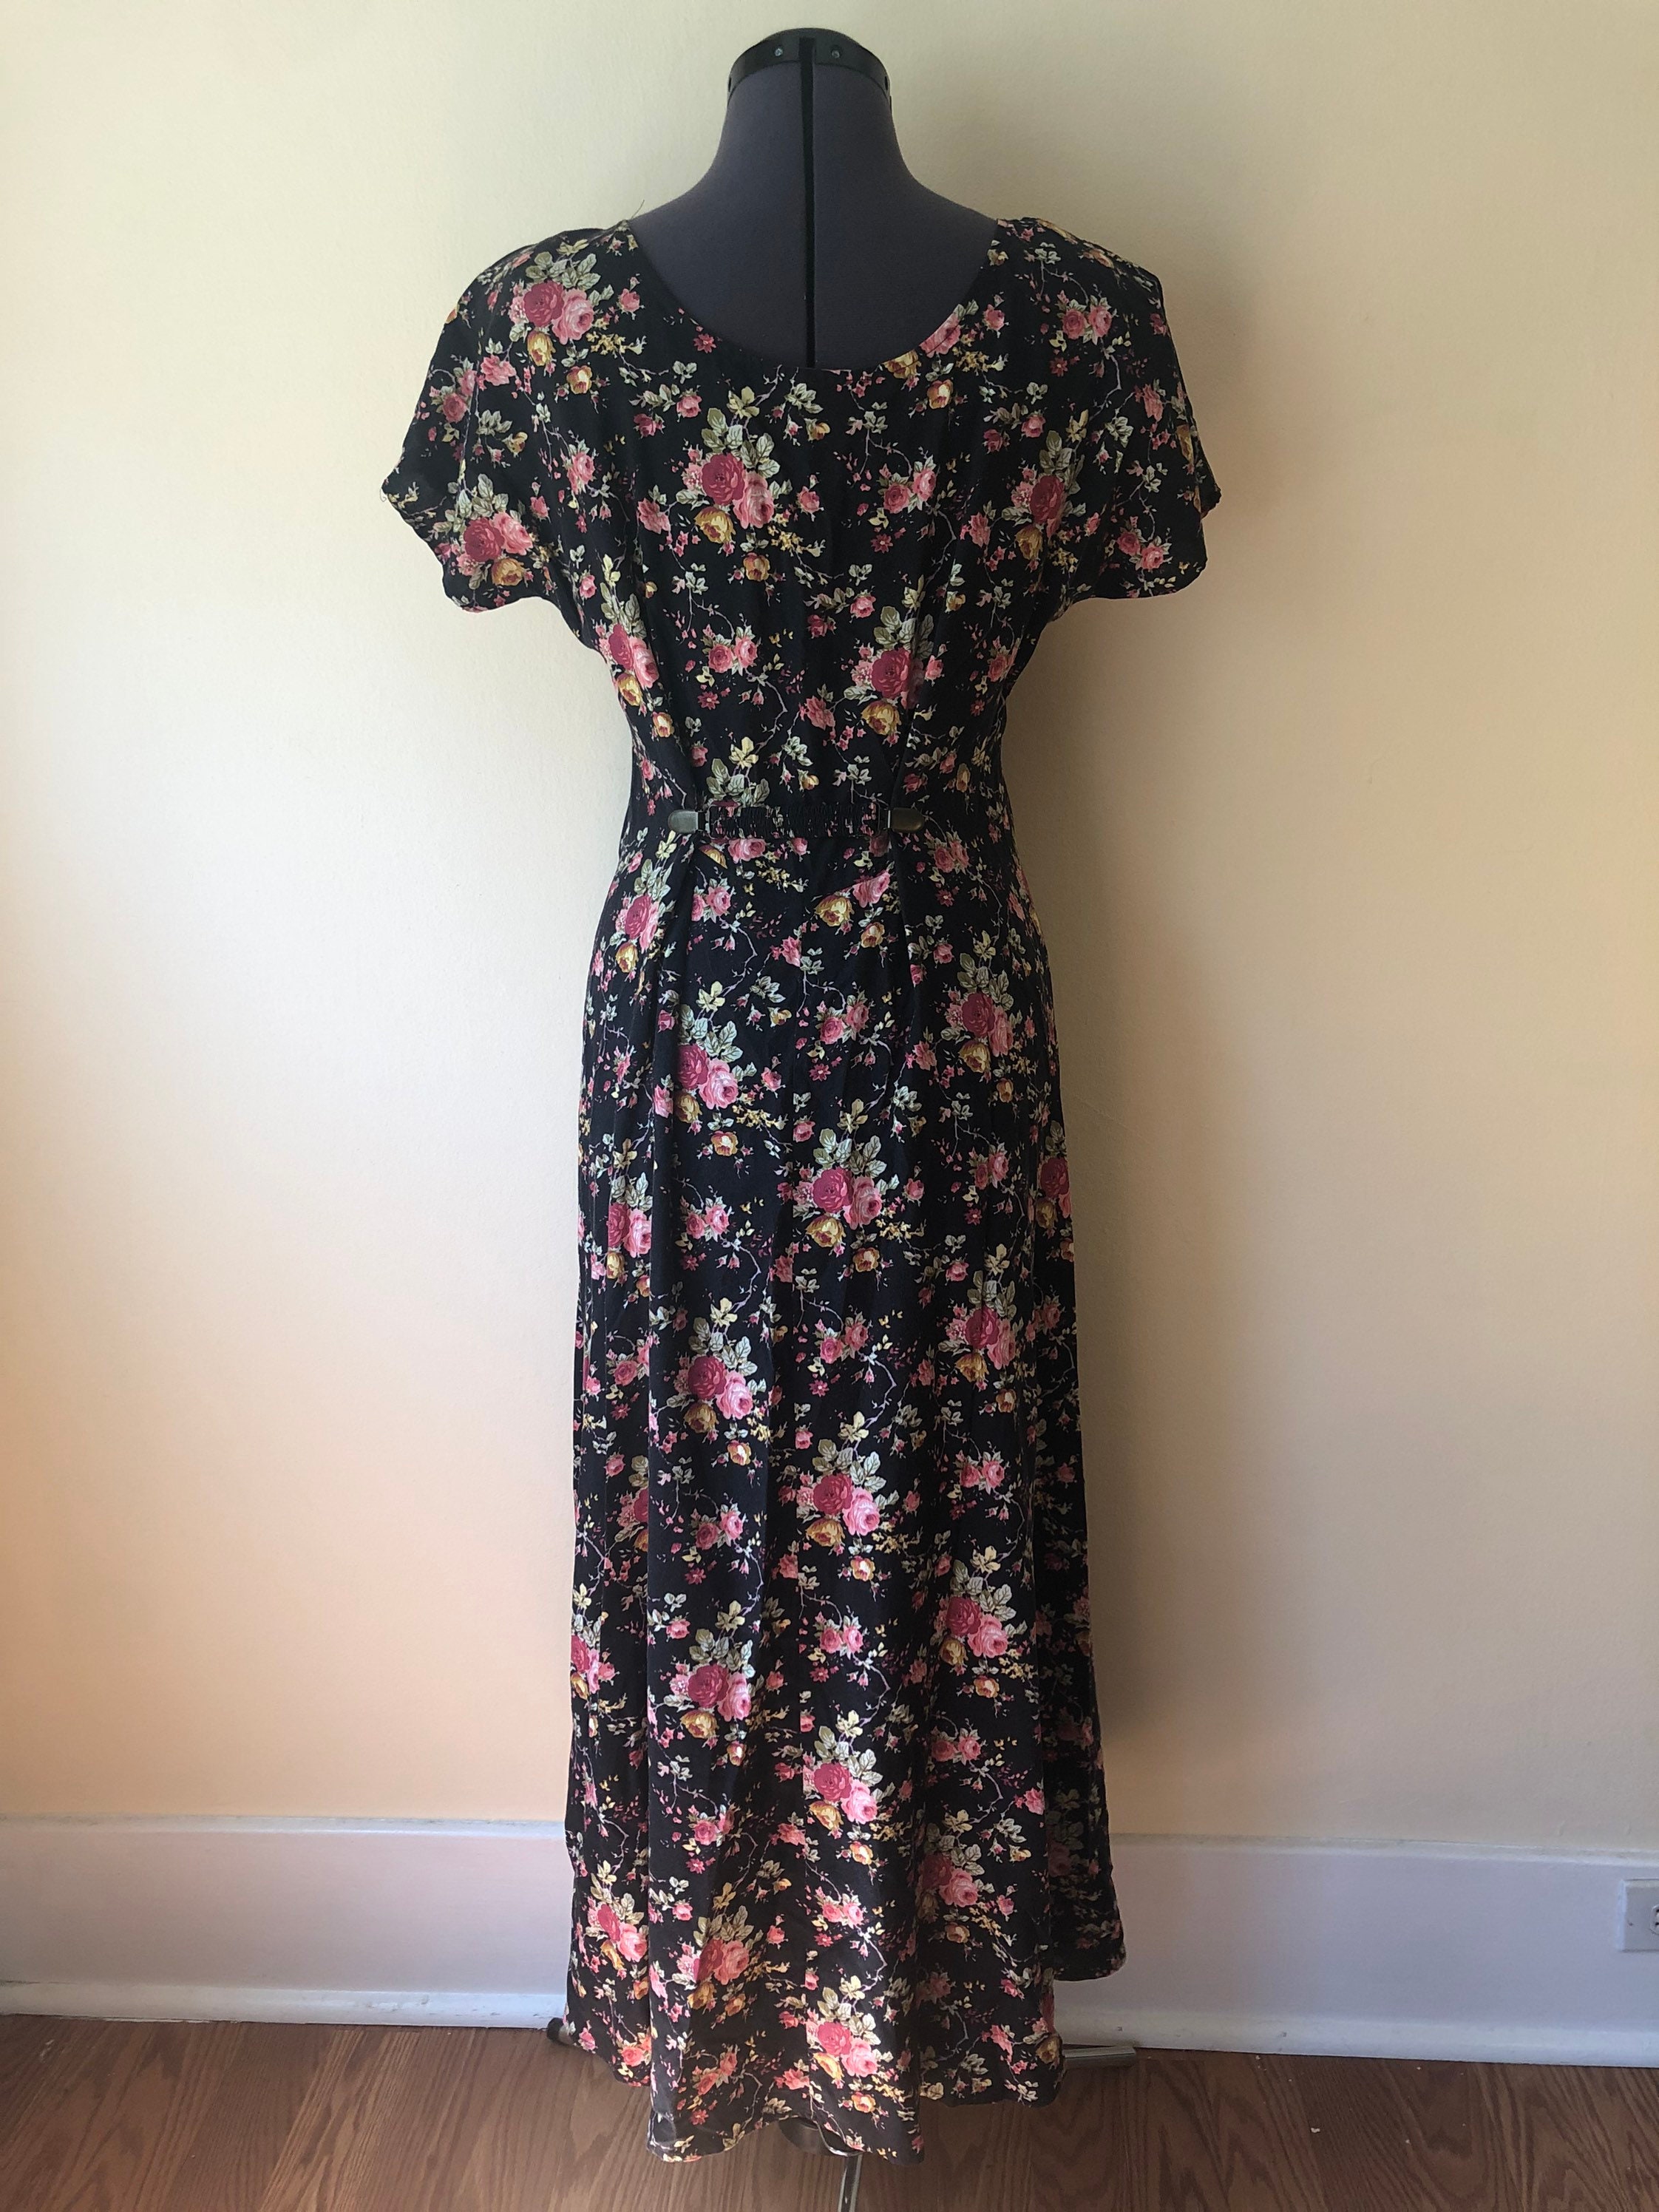 Classic 1990's Floral Grunge Dress by Molly Malloy for All | Etsy